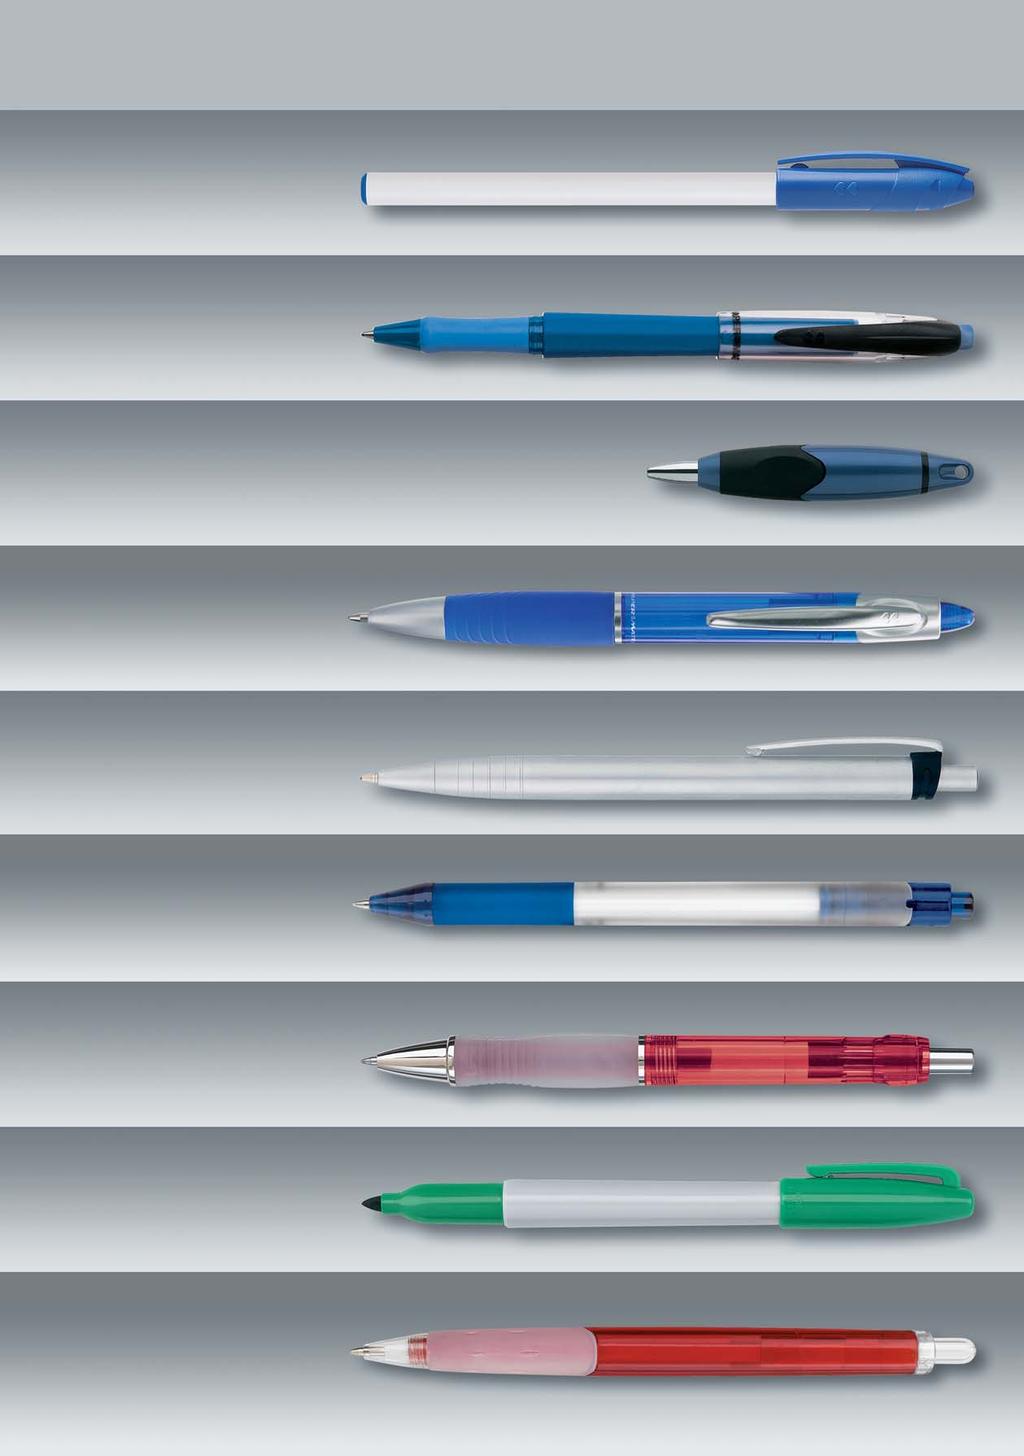 STICK 2020 ball pen with cap in green, red, blue or black black ink. ERASER.MAX ball pen in blue, blue ink. or black, black ink. MINI telescop-ball pen in red, blue and white black ink.